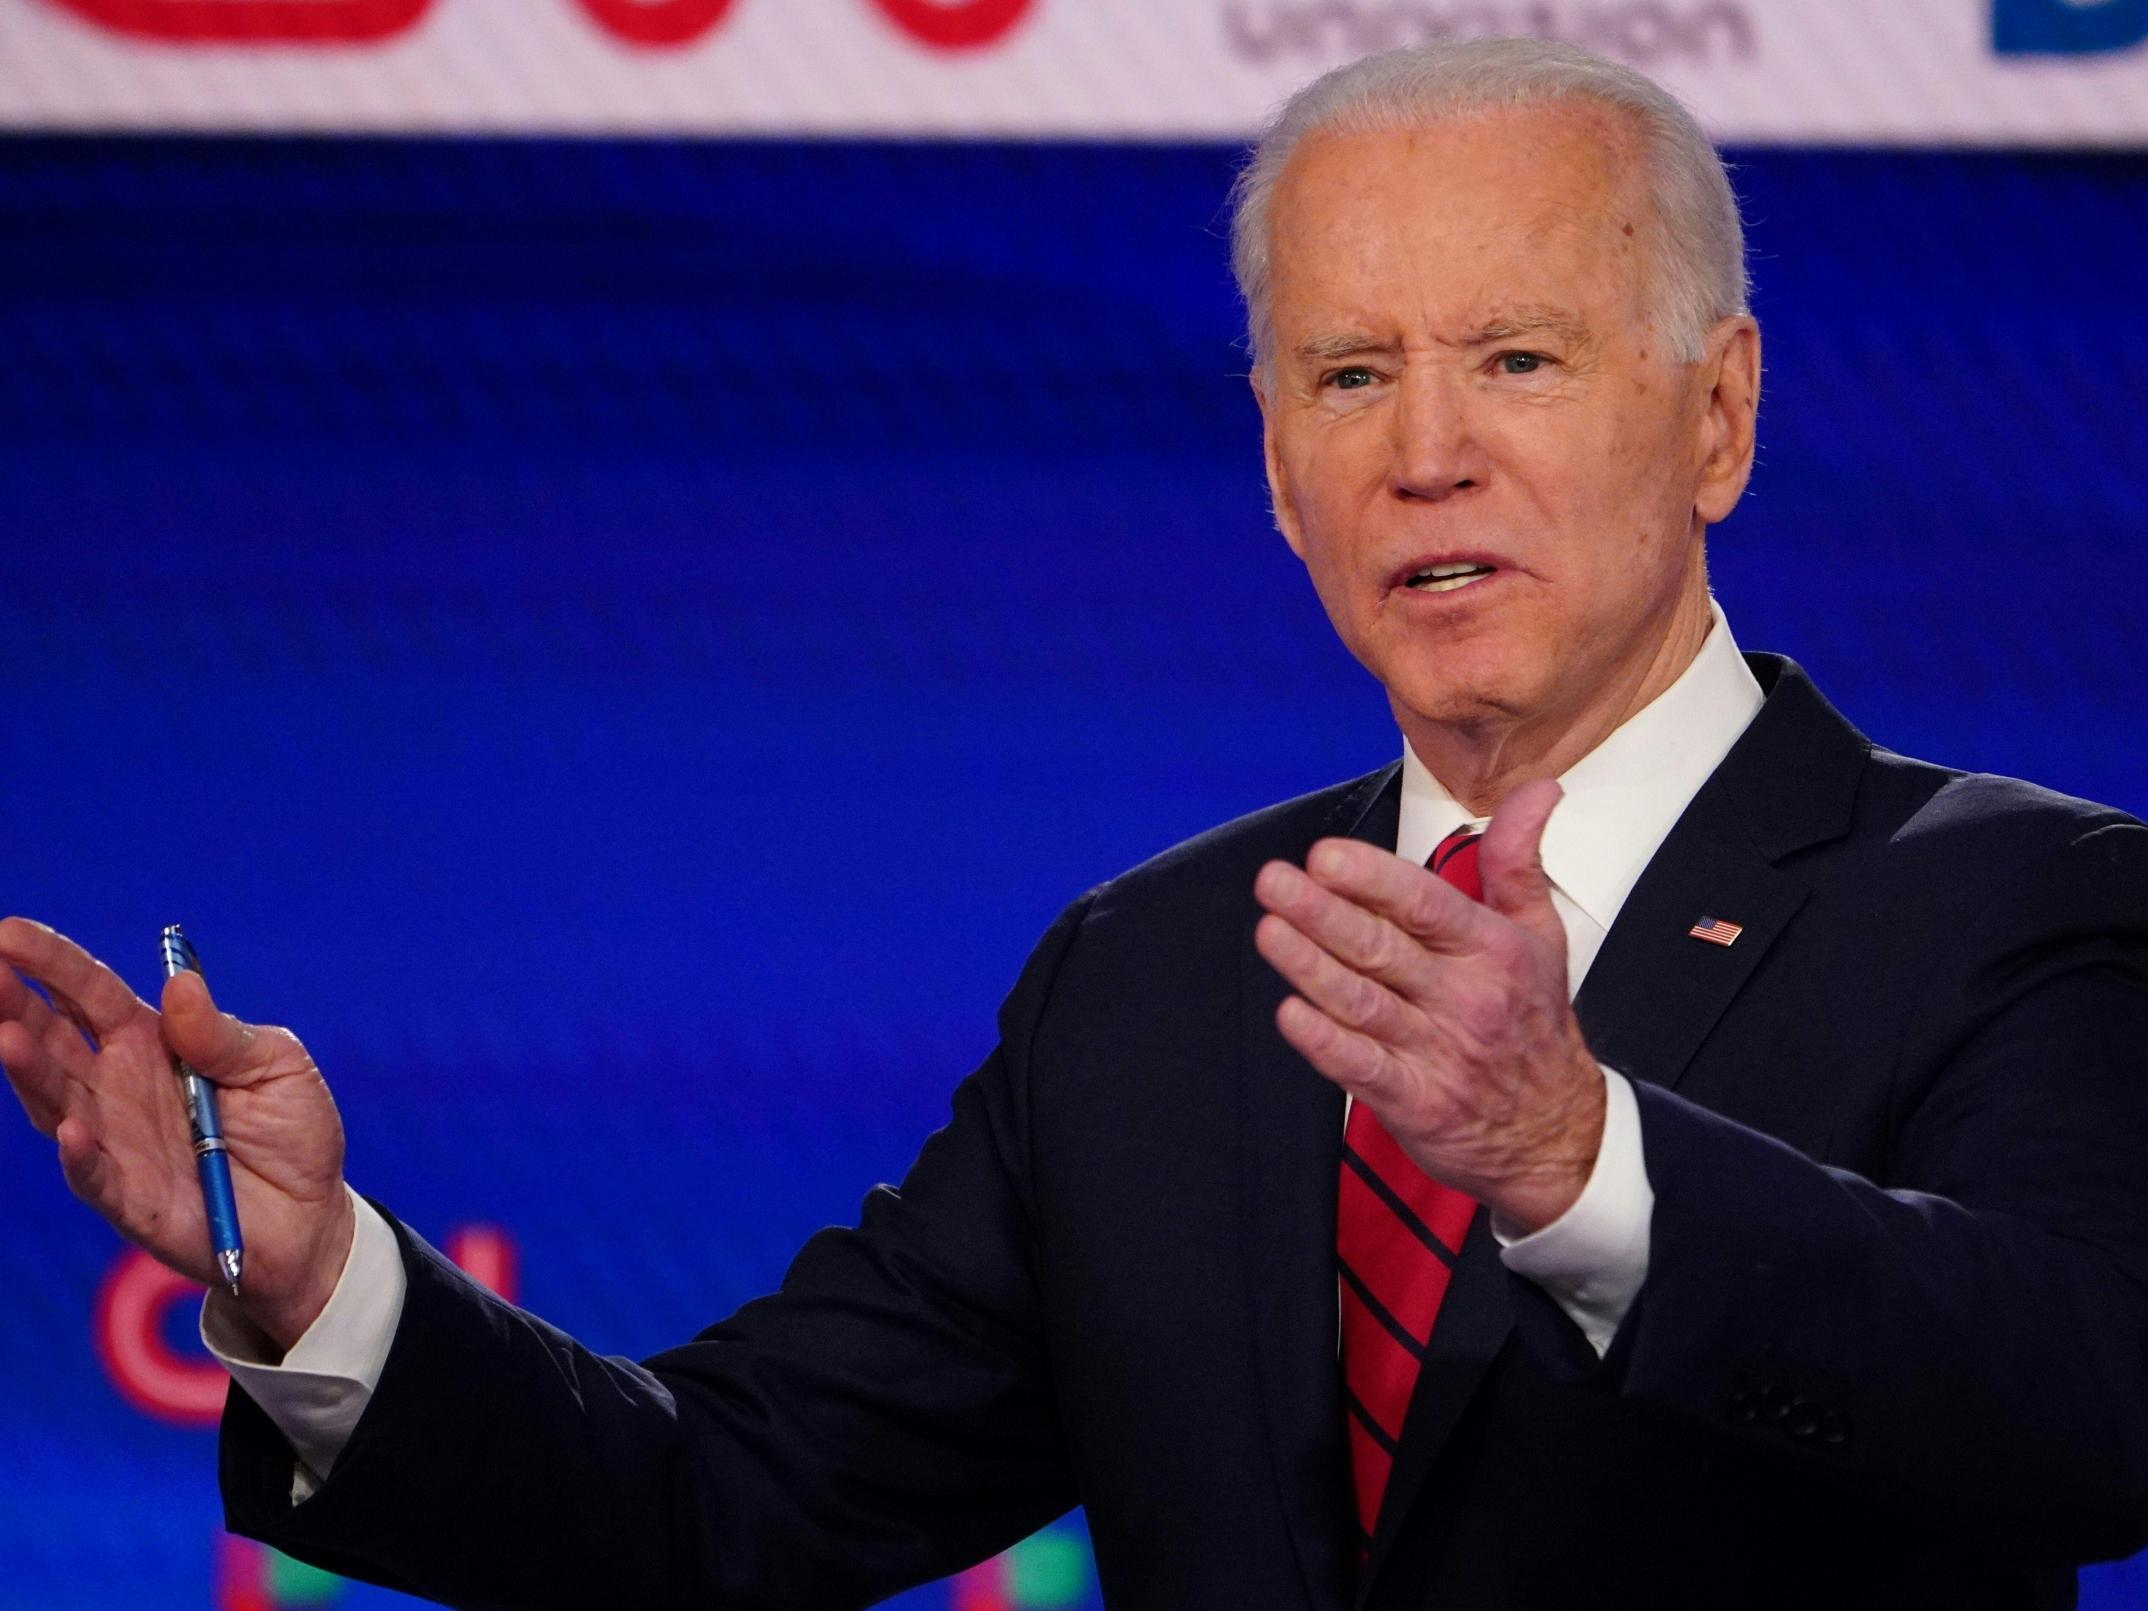 Trump and Biden expected to face off in dramatically altered political landscape